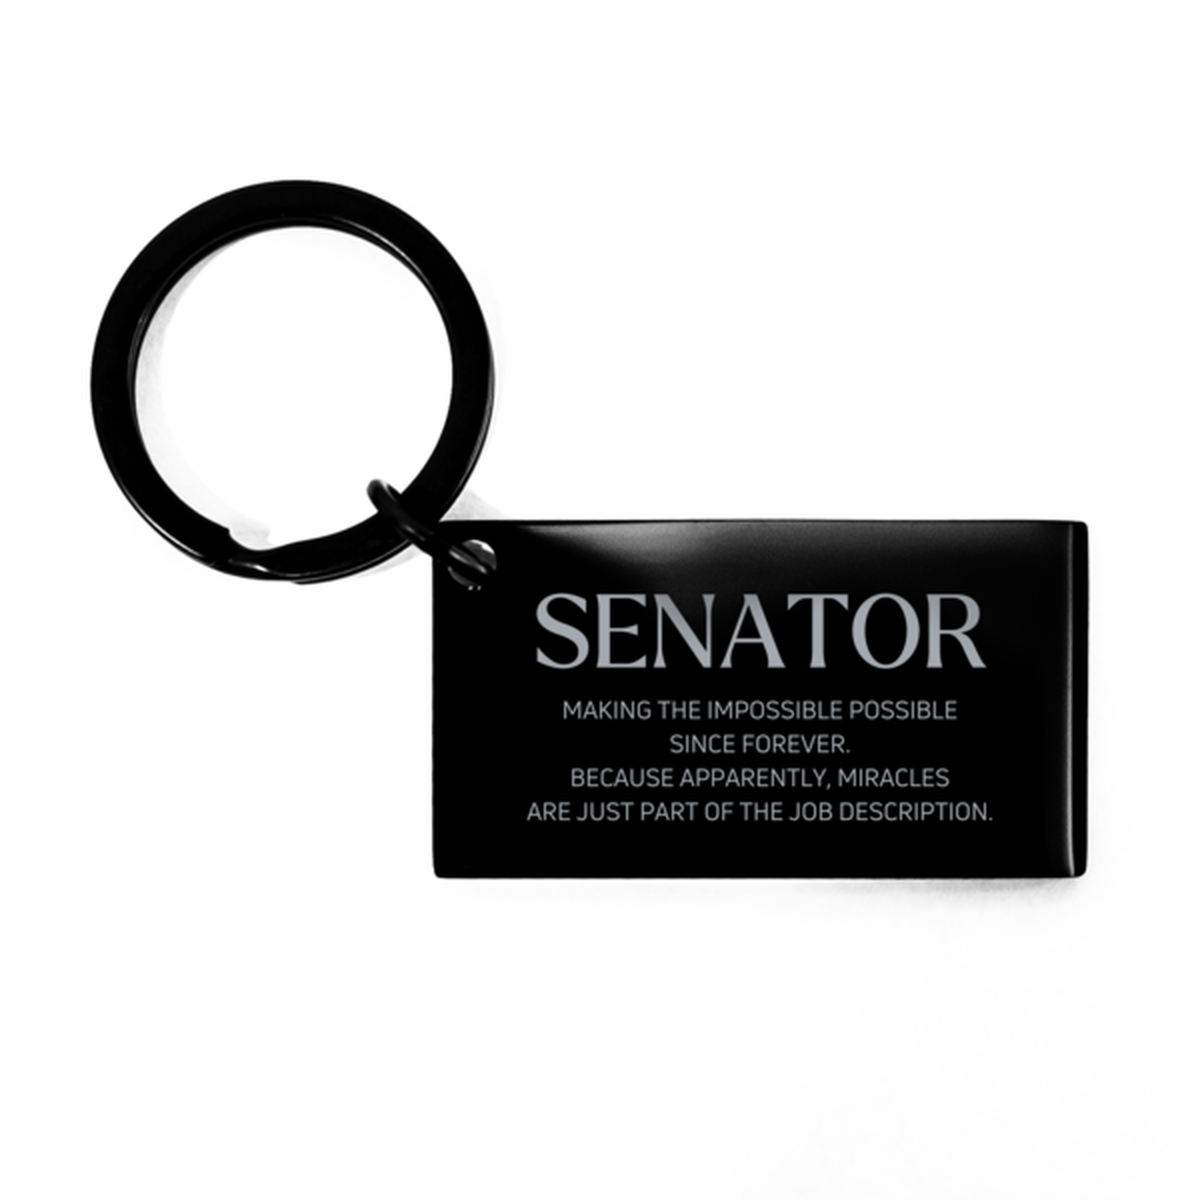 Funny Senator Gifts, Miracles are just part of the job description, Inspirational Birthday Keychain For Senator, Men, Women, Coworkers, Friends, Boss